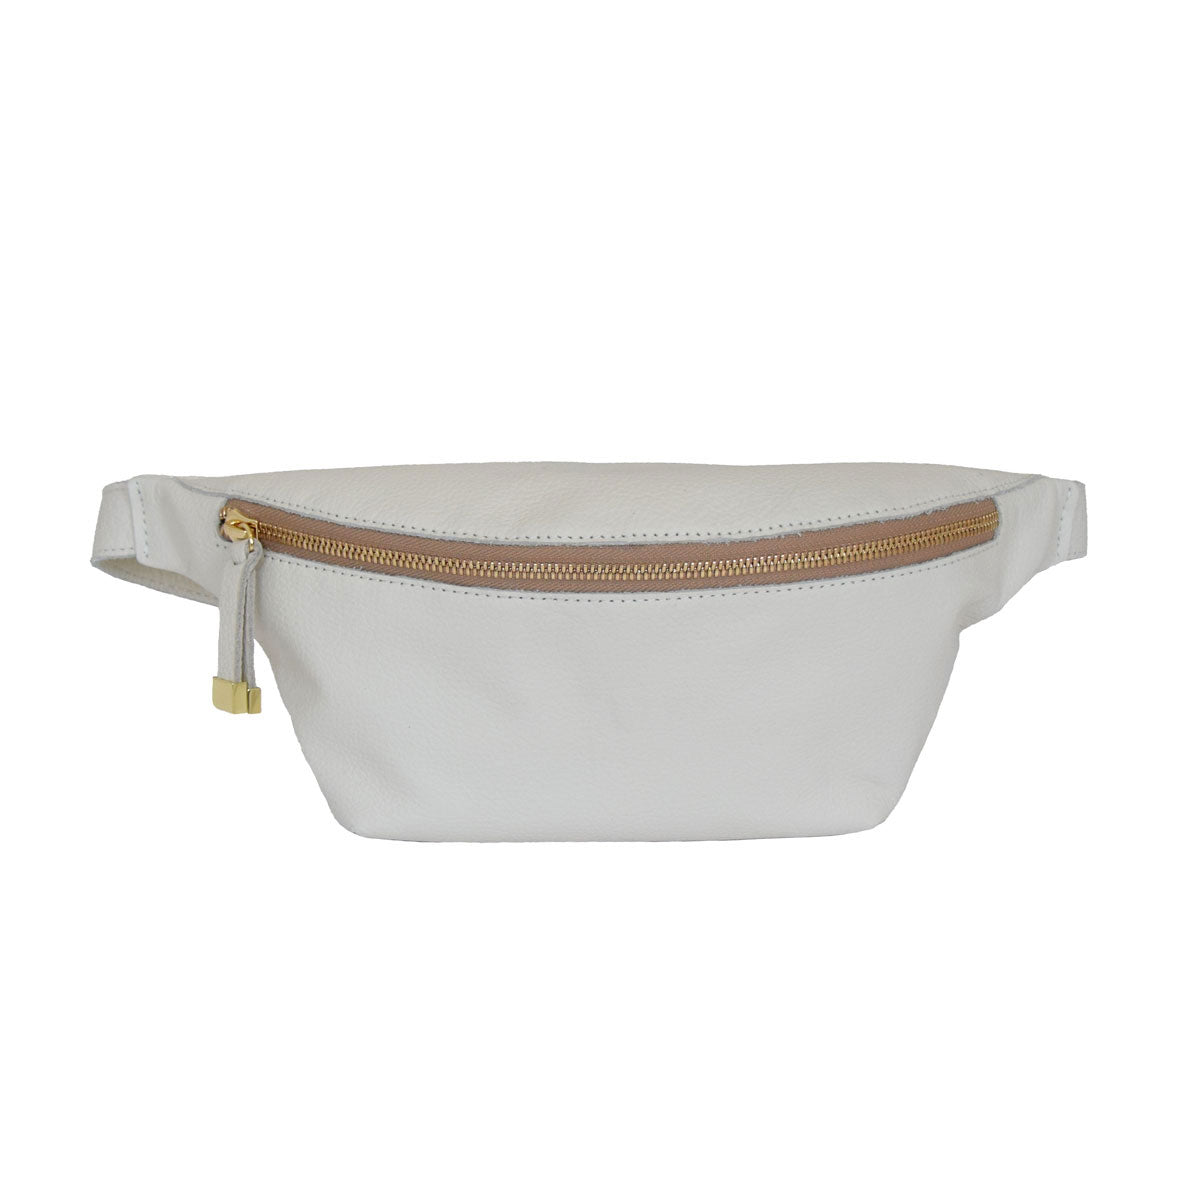 FANNY PACK | CREAM - PREORDER